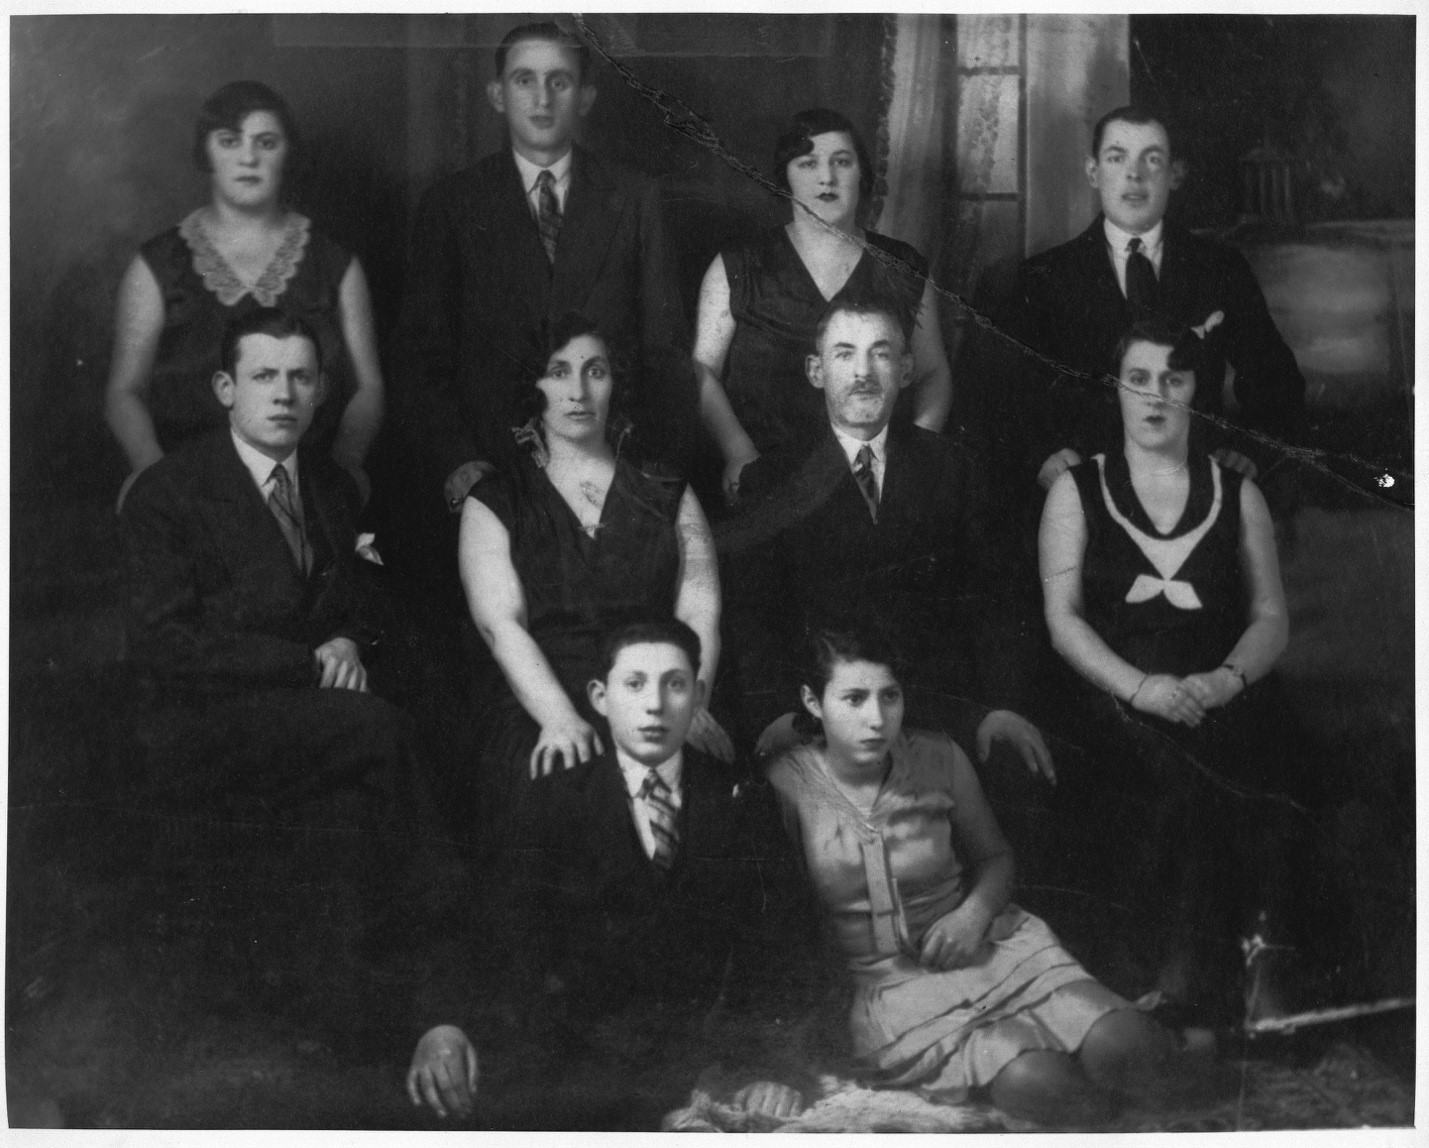 Black and white photo of four individuals standing at the back, four individuals seated in the middle row on chairs and two individuals seated on the floor at the front.